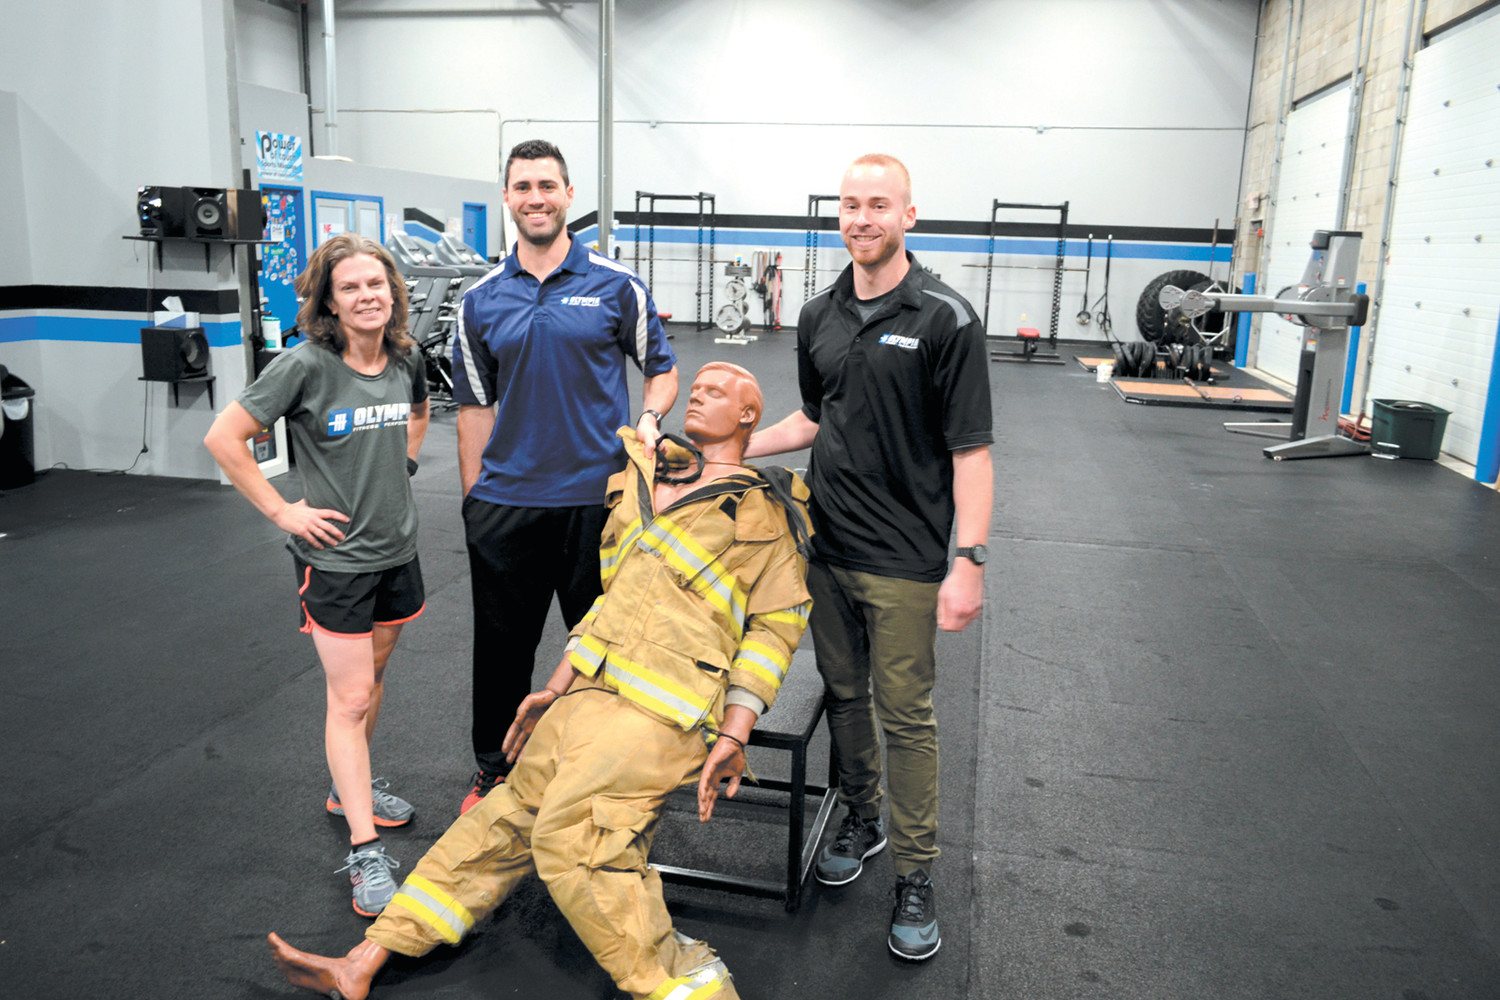 TRAINING FOR DUMMIES: Maura J. Zimmer (NSCA), Olympia Fitness owner Steve Zarriello (CSCS, TPI certified) and Mike Lefebvre pose with their workout dummy, which helps prepare potential firefighter recruits for the final stage of the PPA physical fitness examination.